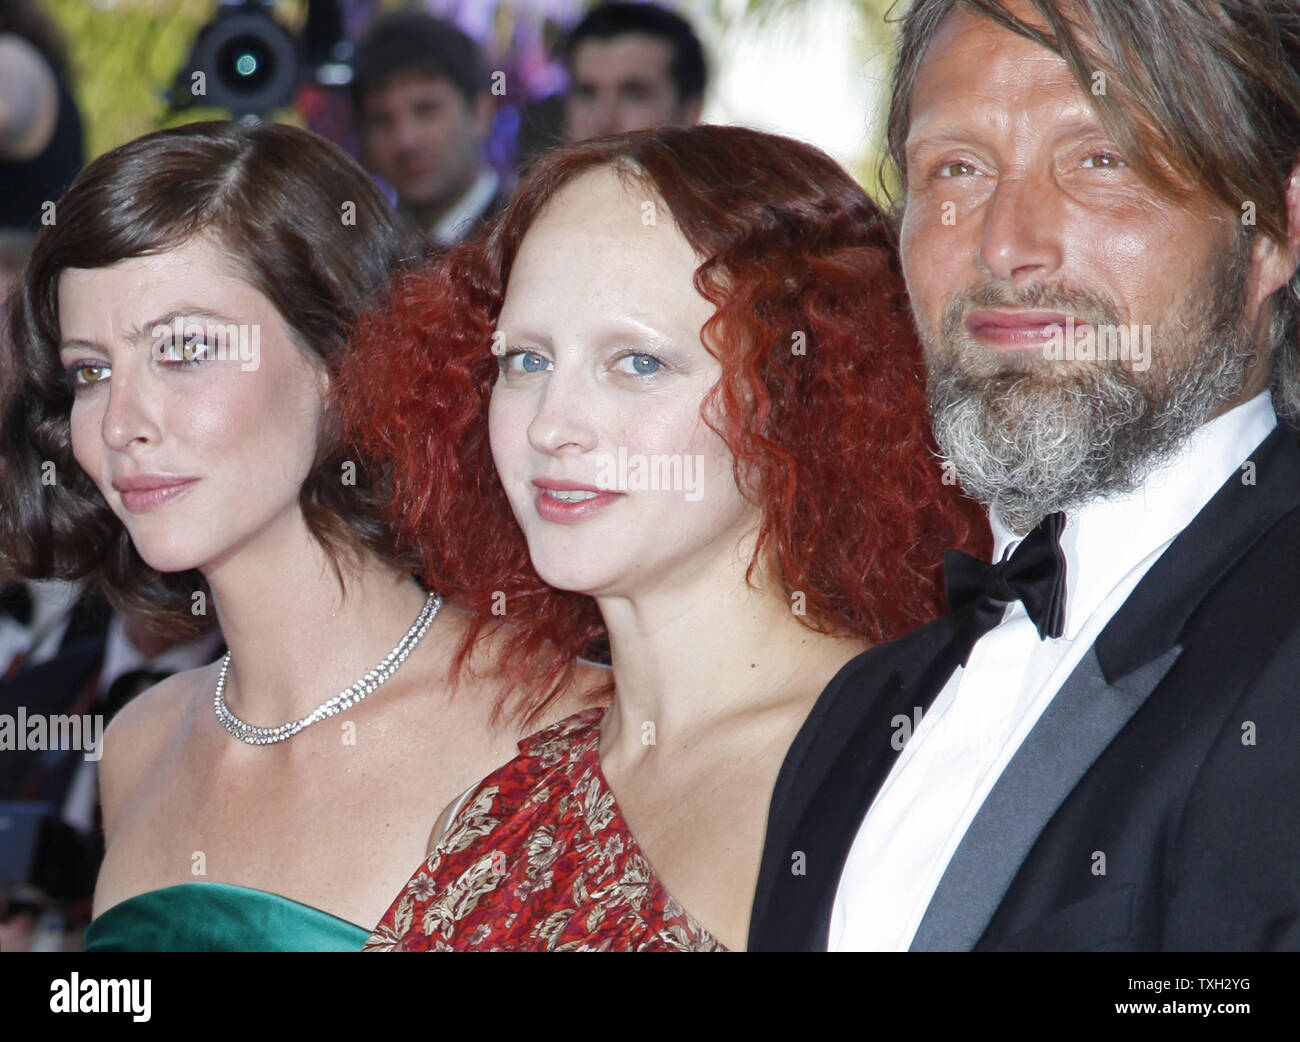 Actresses Anna Mouglalis (L), Elena Morozova (C) and actor Mads Mikkelsen arrive on the red carpet before the premiere of the film 'Coco Chanel & Igor Stravinsky' during the closing ceremony of the 62nd annual Cannes Film Festival in Cannes, France on May 24, 2009.   (UPI Photo/David Silpa) Stock Photo